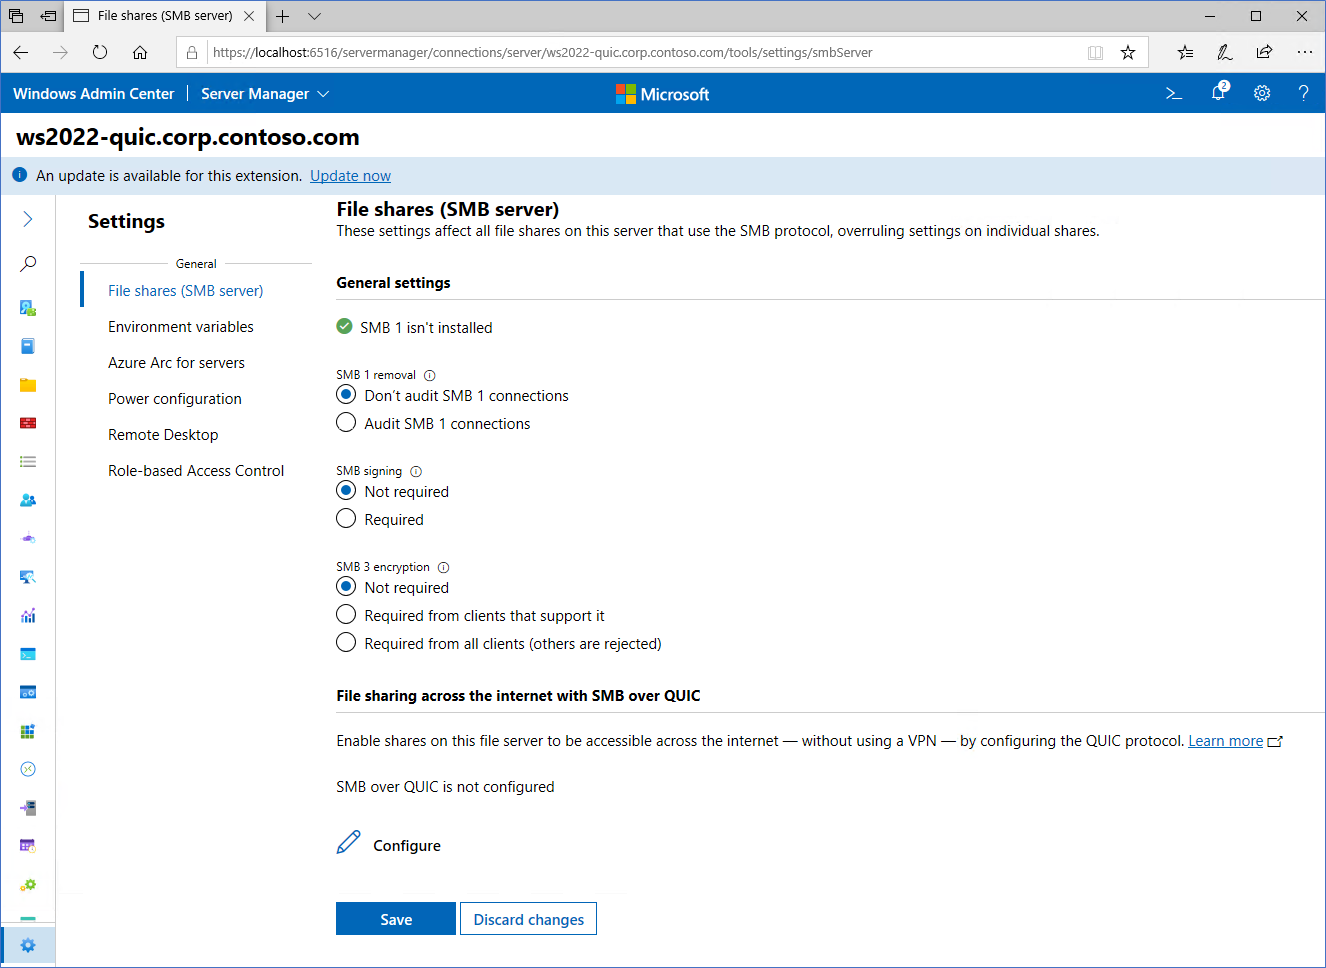 An image showing the configuration screen for SMB over QUIC in Windows Admin Center